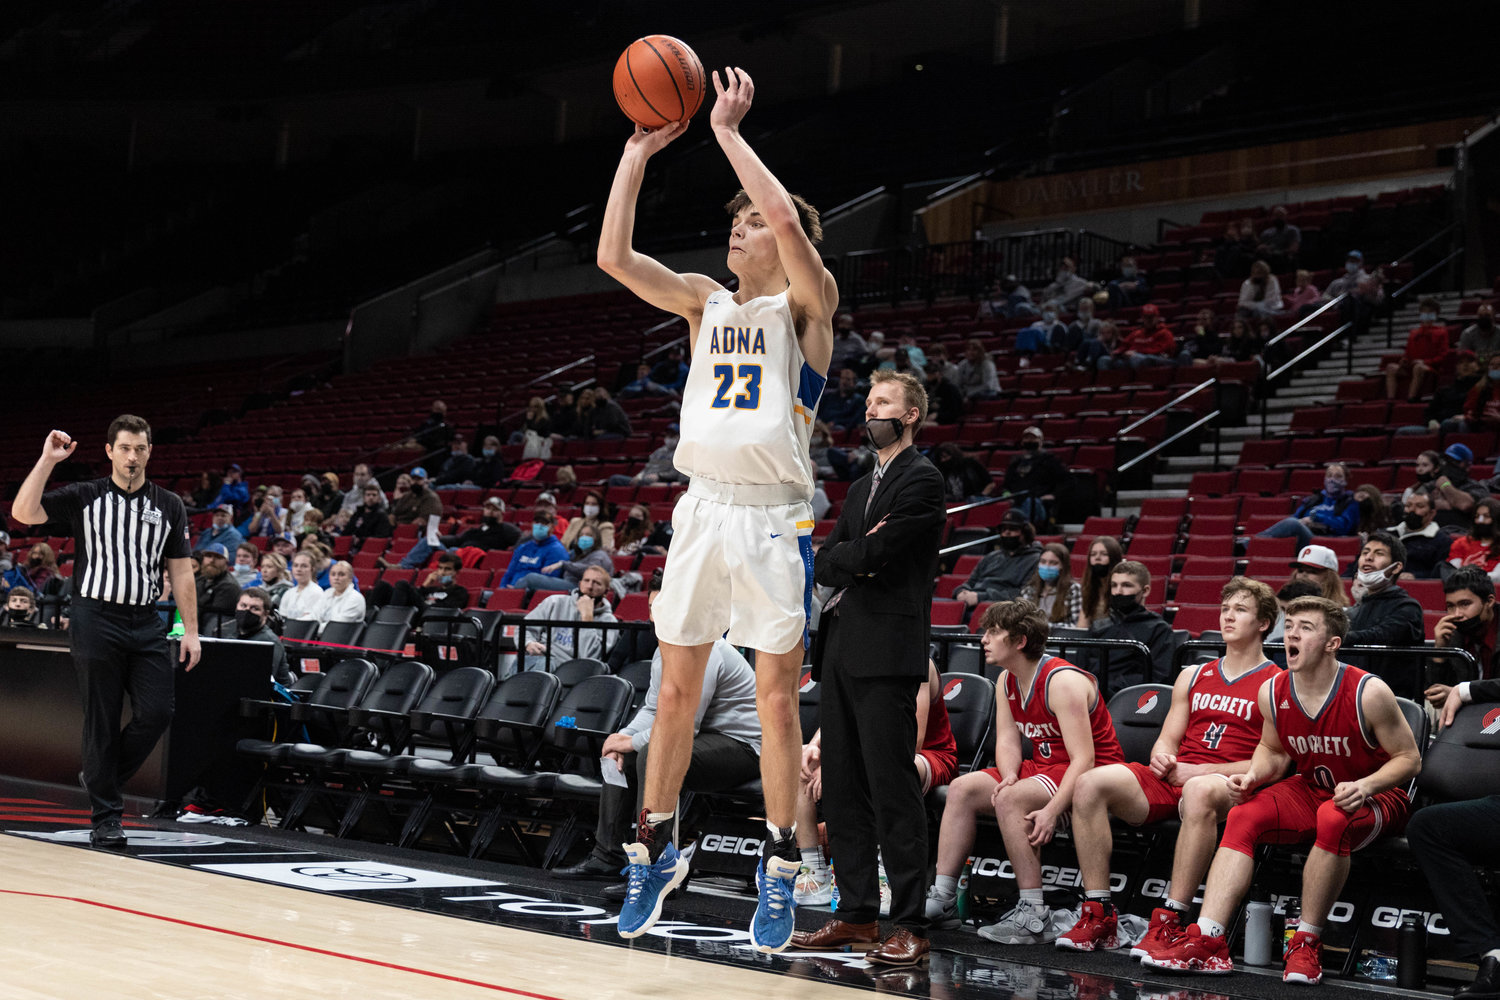 Adna guard Eli Smith takes a three-pointer right at the end of the half against Castle Rock at the Moda Center in Portland Dec. 18.